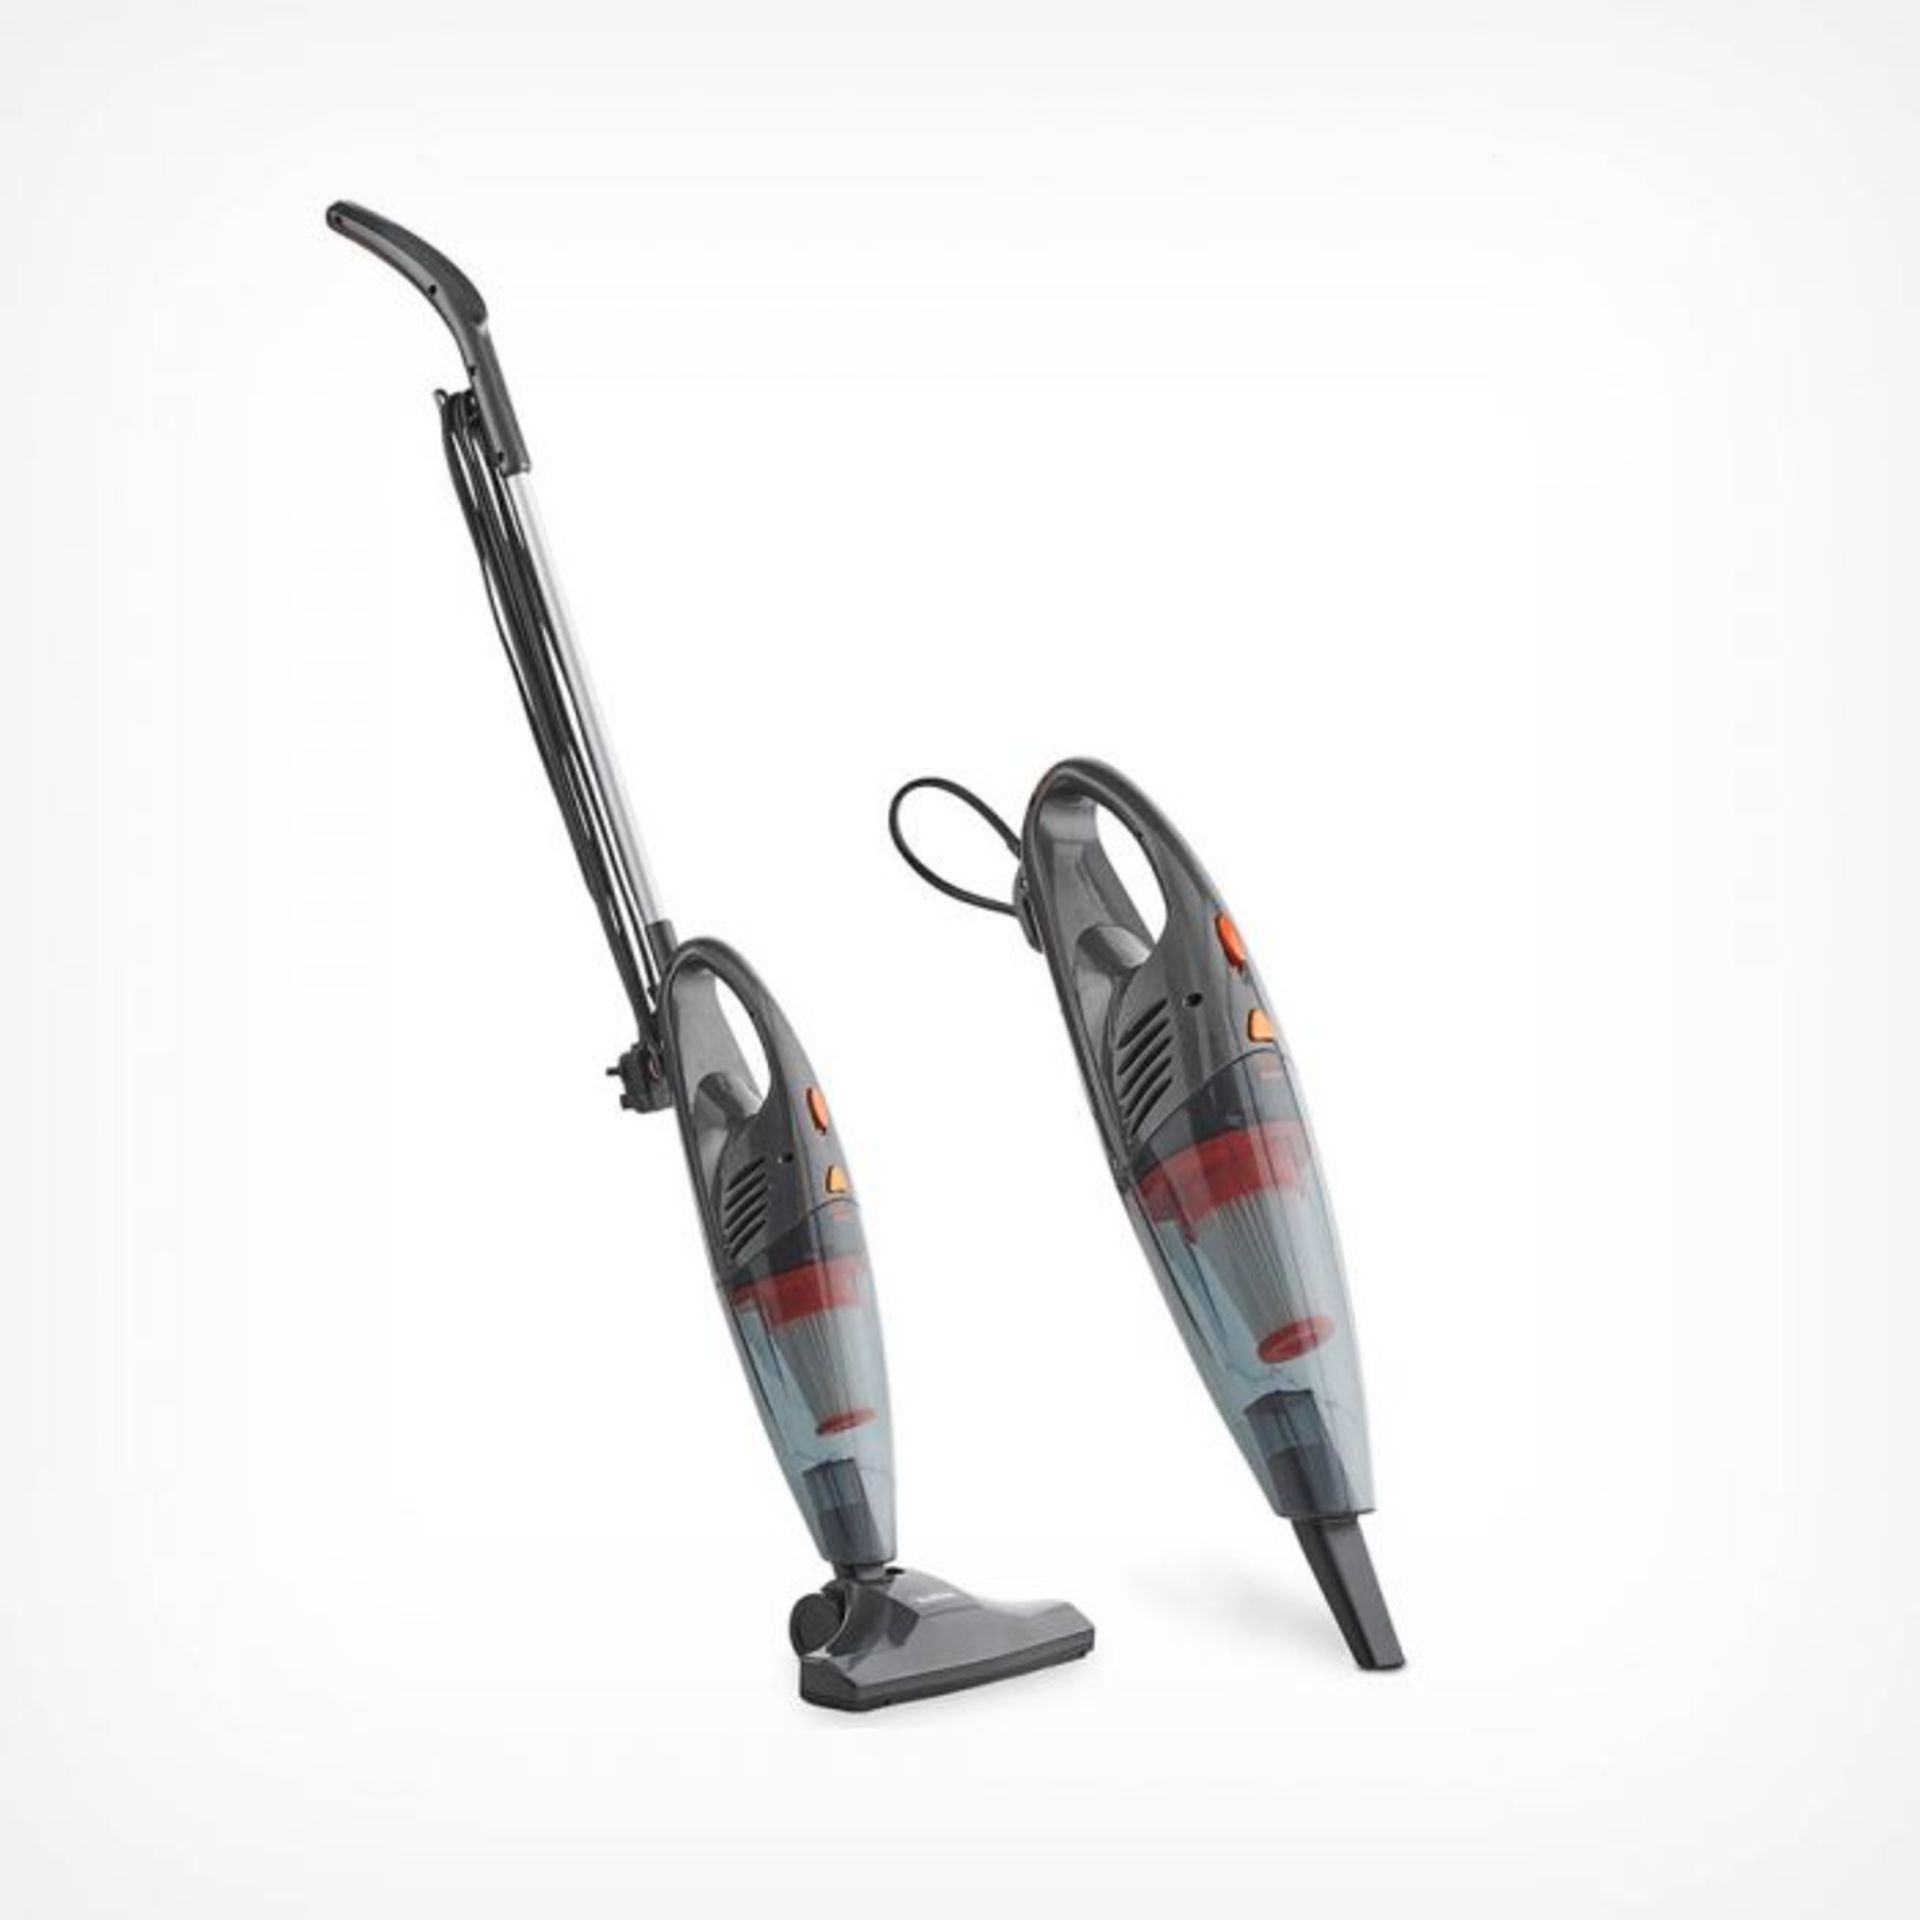 2 in 1 Stick Vacuum 600W - Grey. Don’t struggle with large, heavy vacuum cleaners - with this